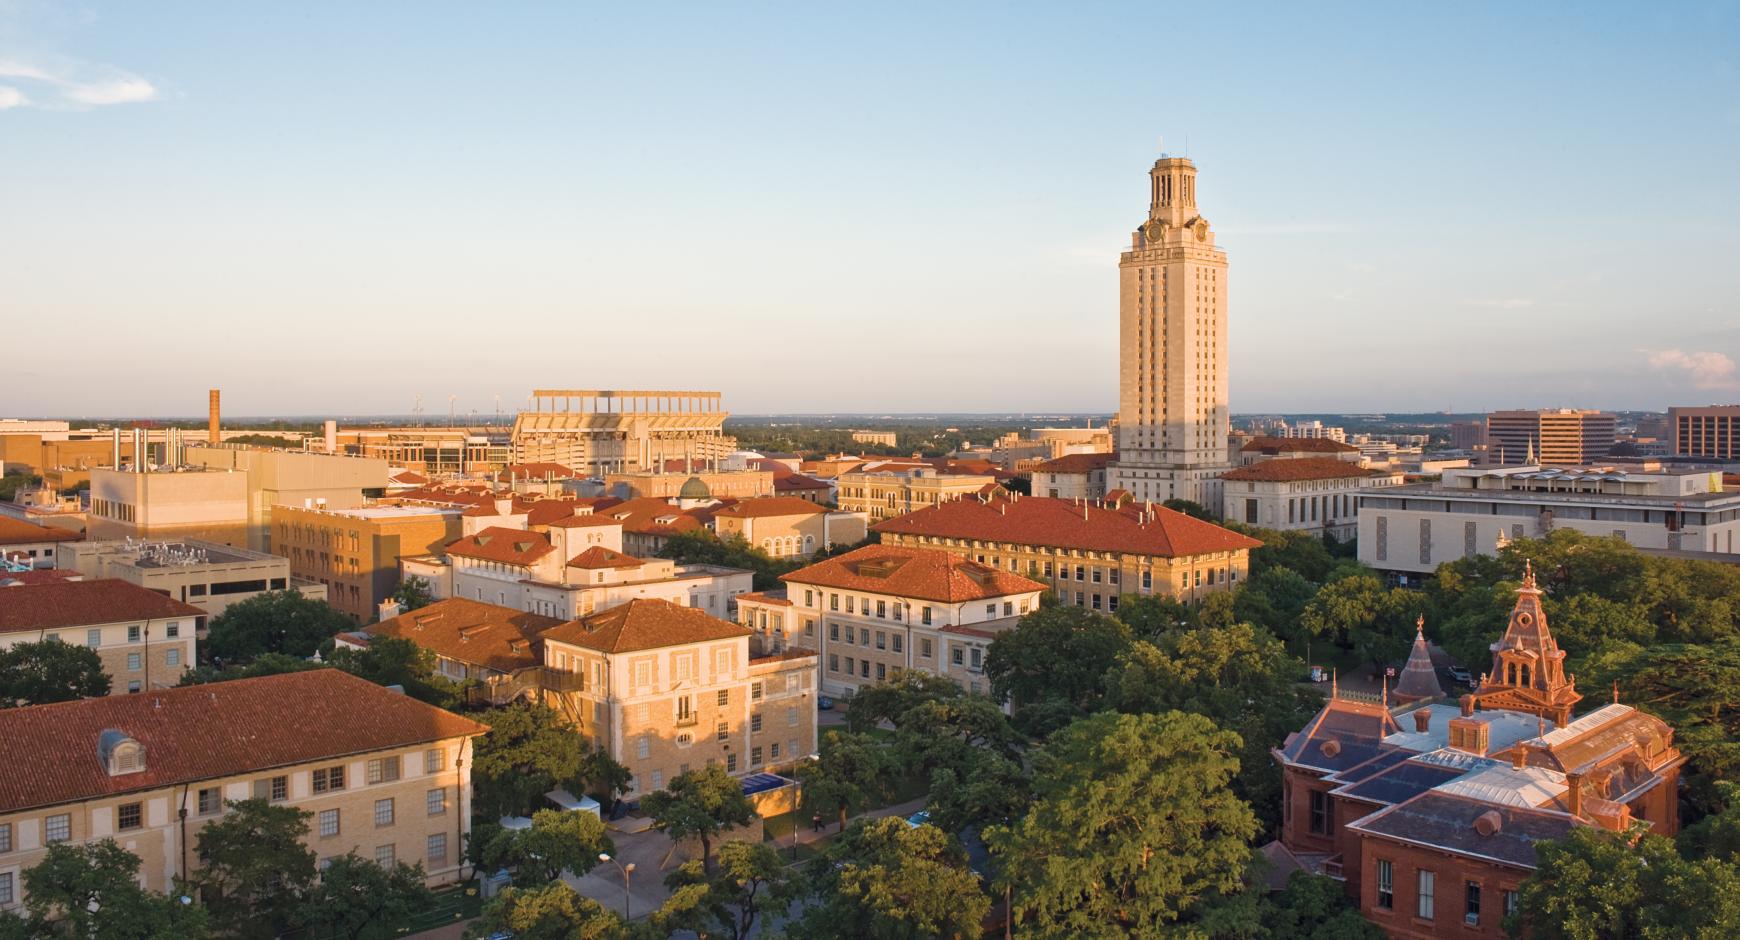 Tuition at University Of Texas 2022